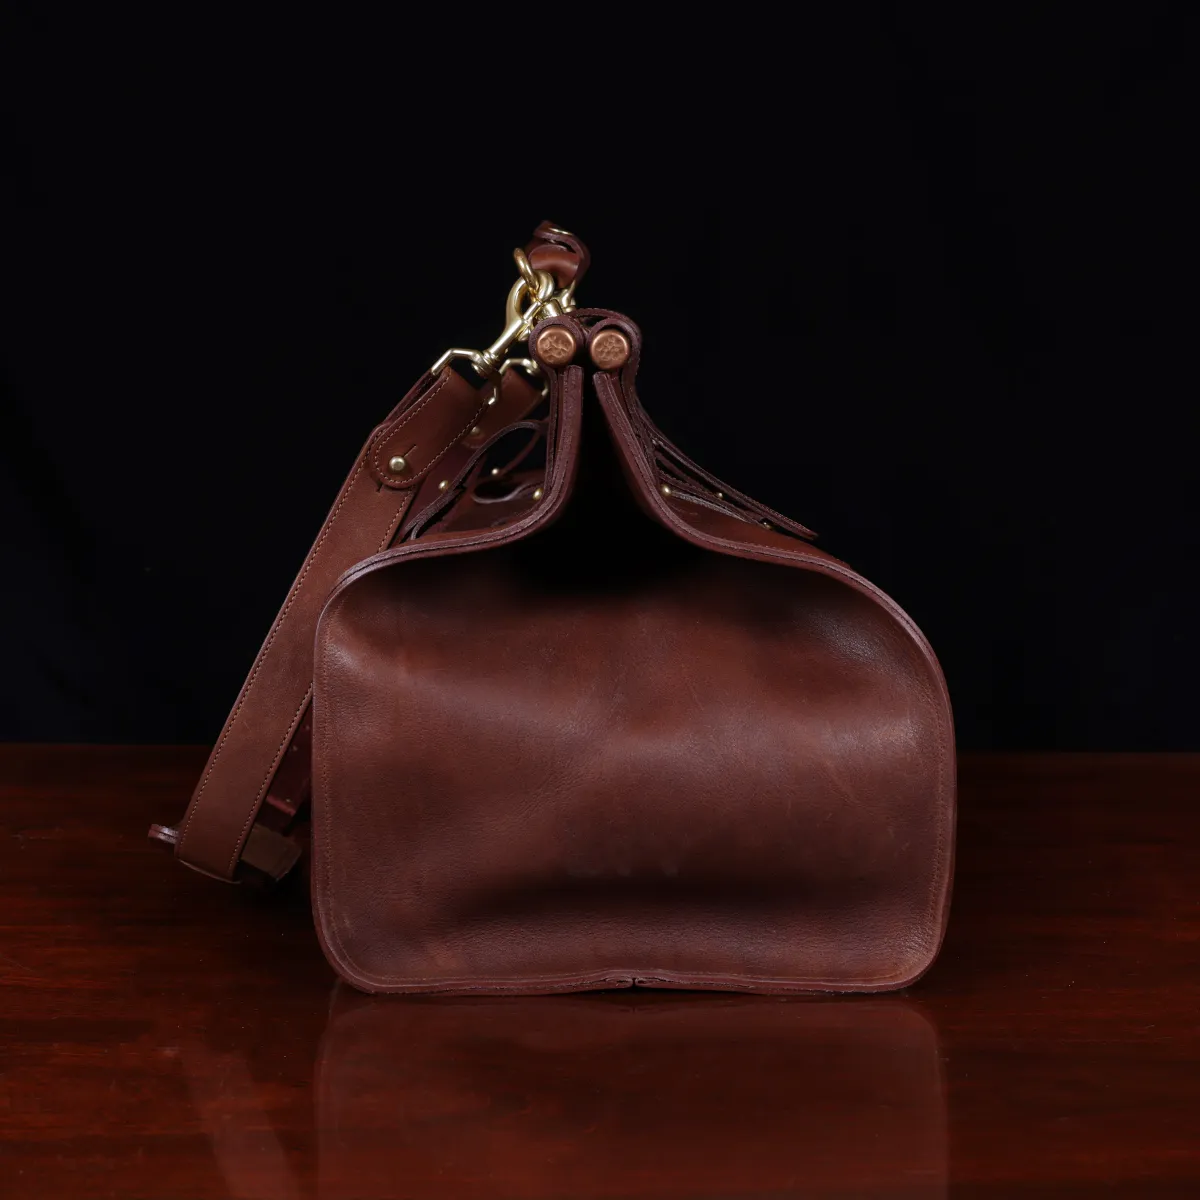 Vintage-style dark brown No. 3 Grip Bag on wooden table with a dark background - side view